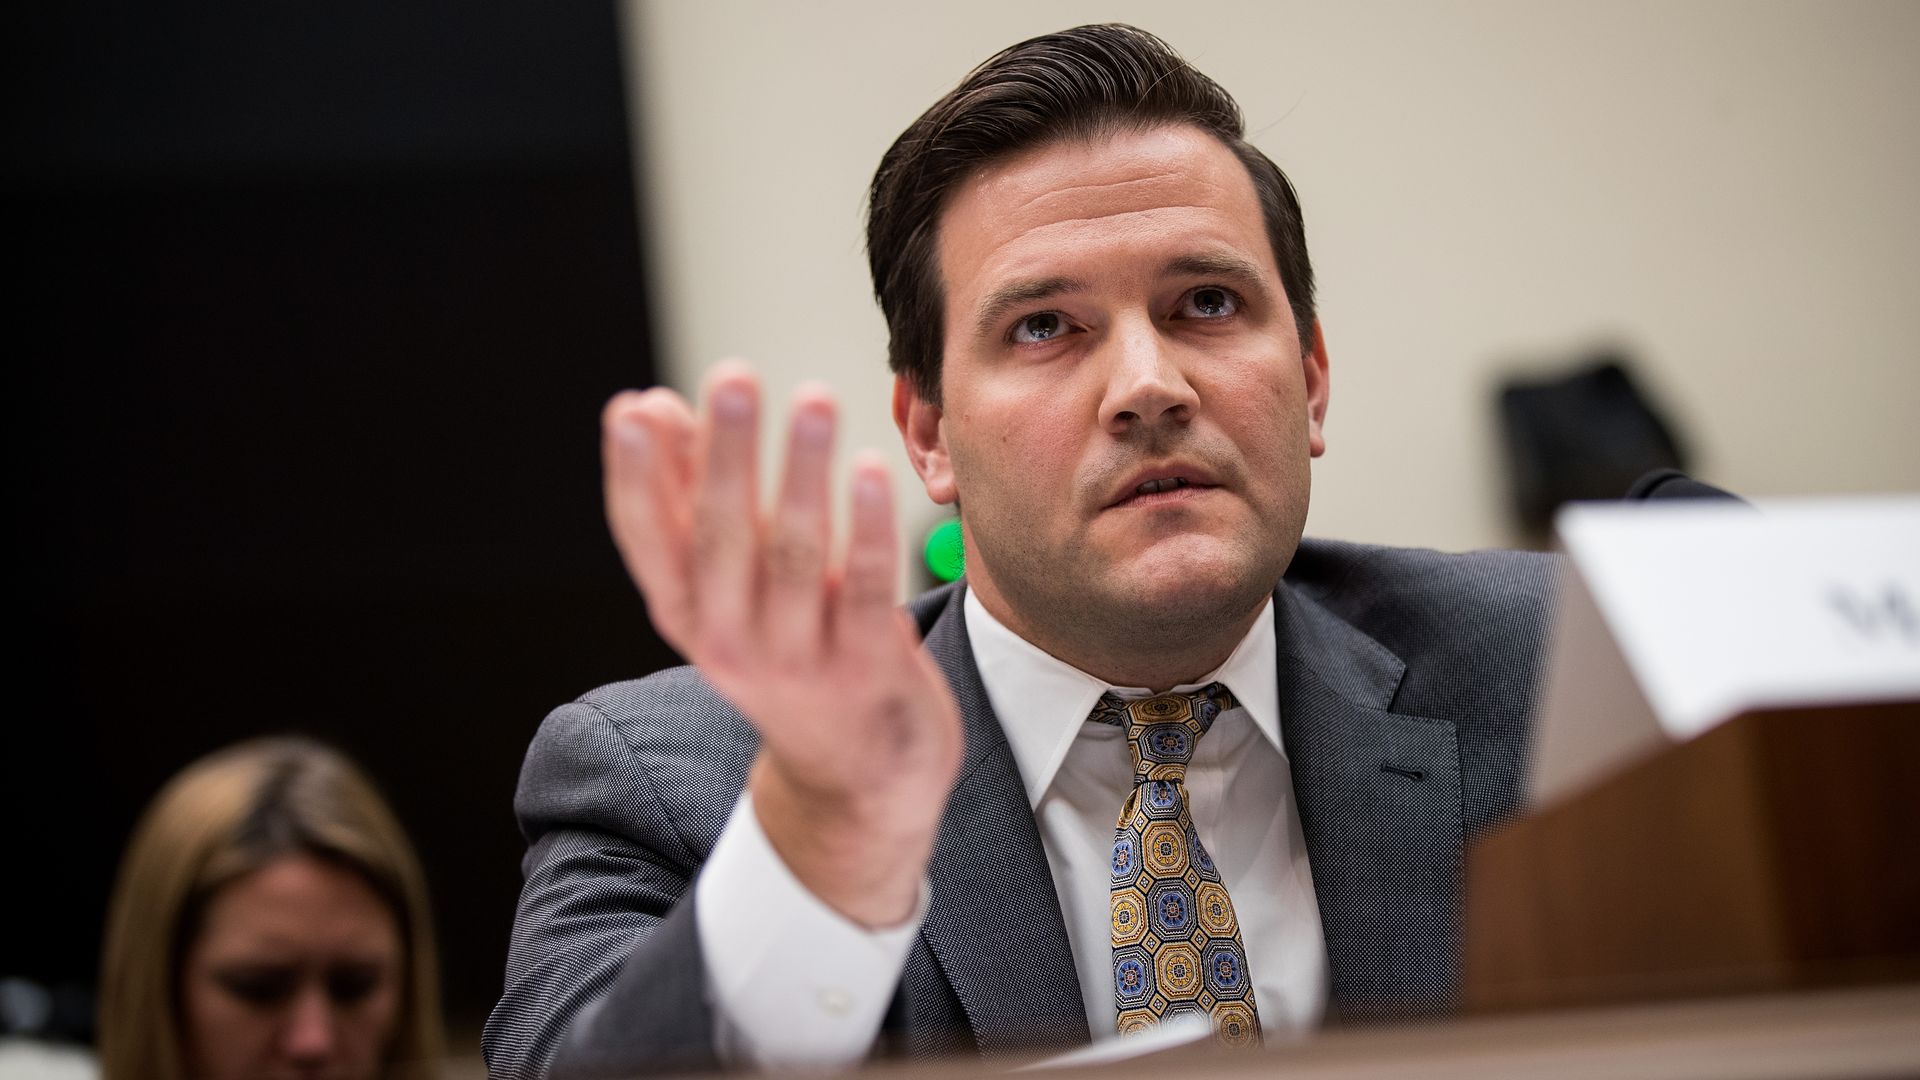 Office of Refugee Resettlement director Scott Lloyd speaking into a microphone at a hearing with one hand in the air